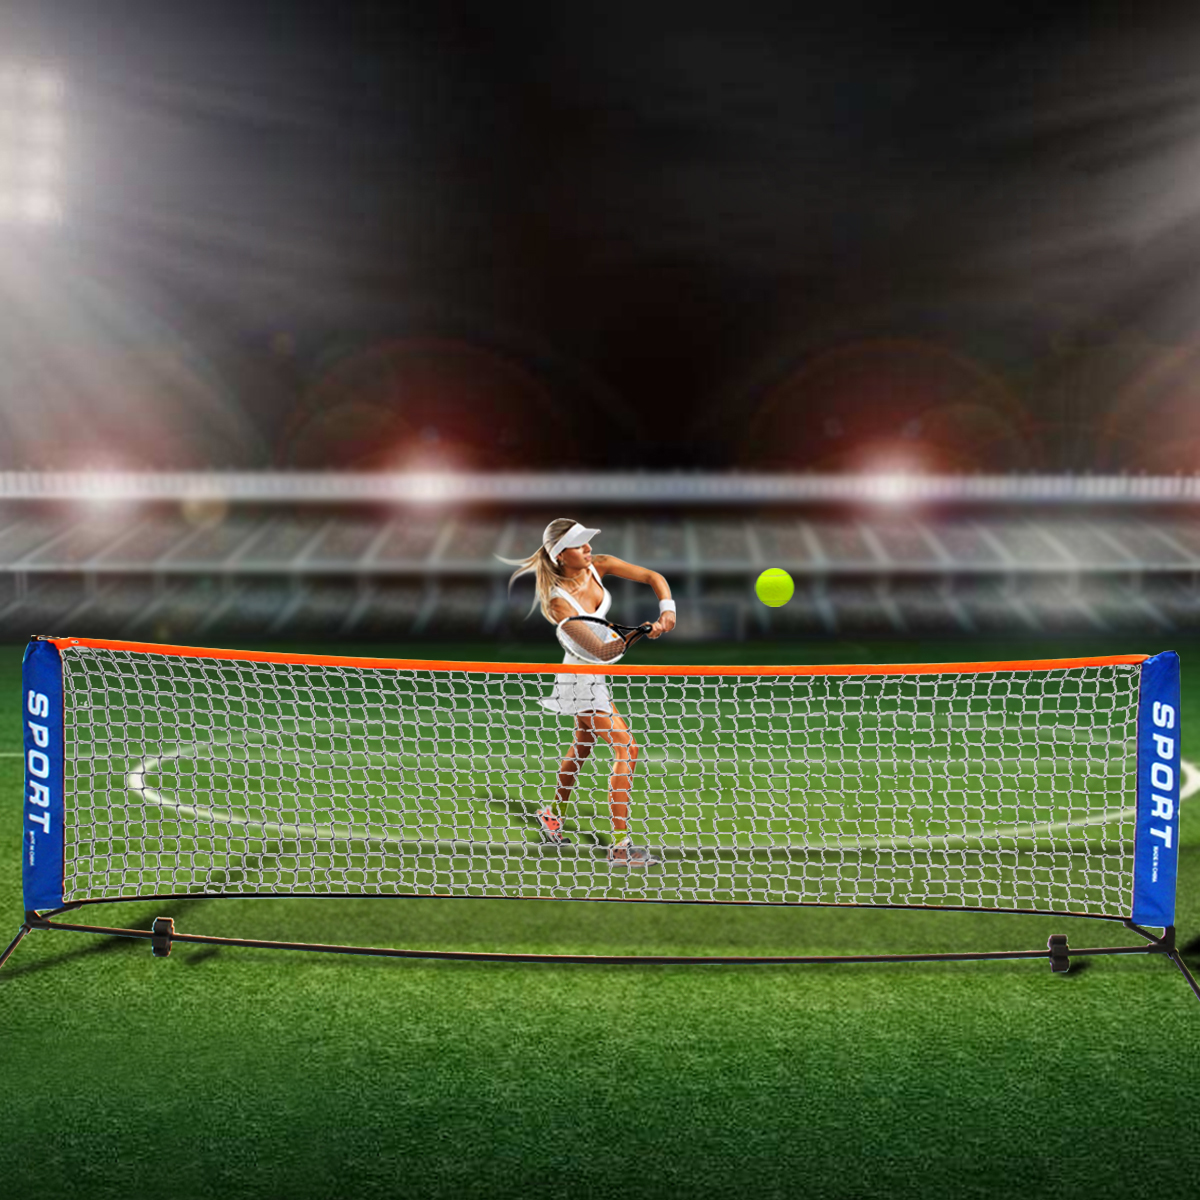 3x085M-Tennis-Net-Standard-Steel-Cable-Badminton-Volleyball-Training-Net-Team-Sport-Net-Frame-with-S-1723822-10